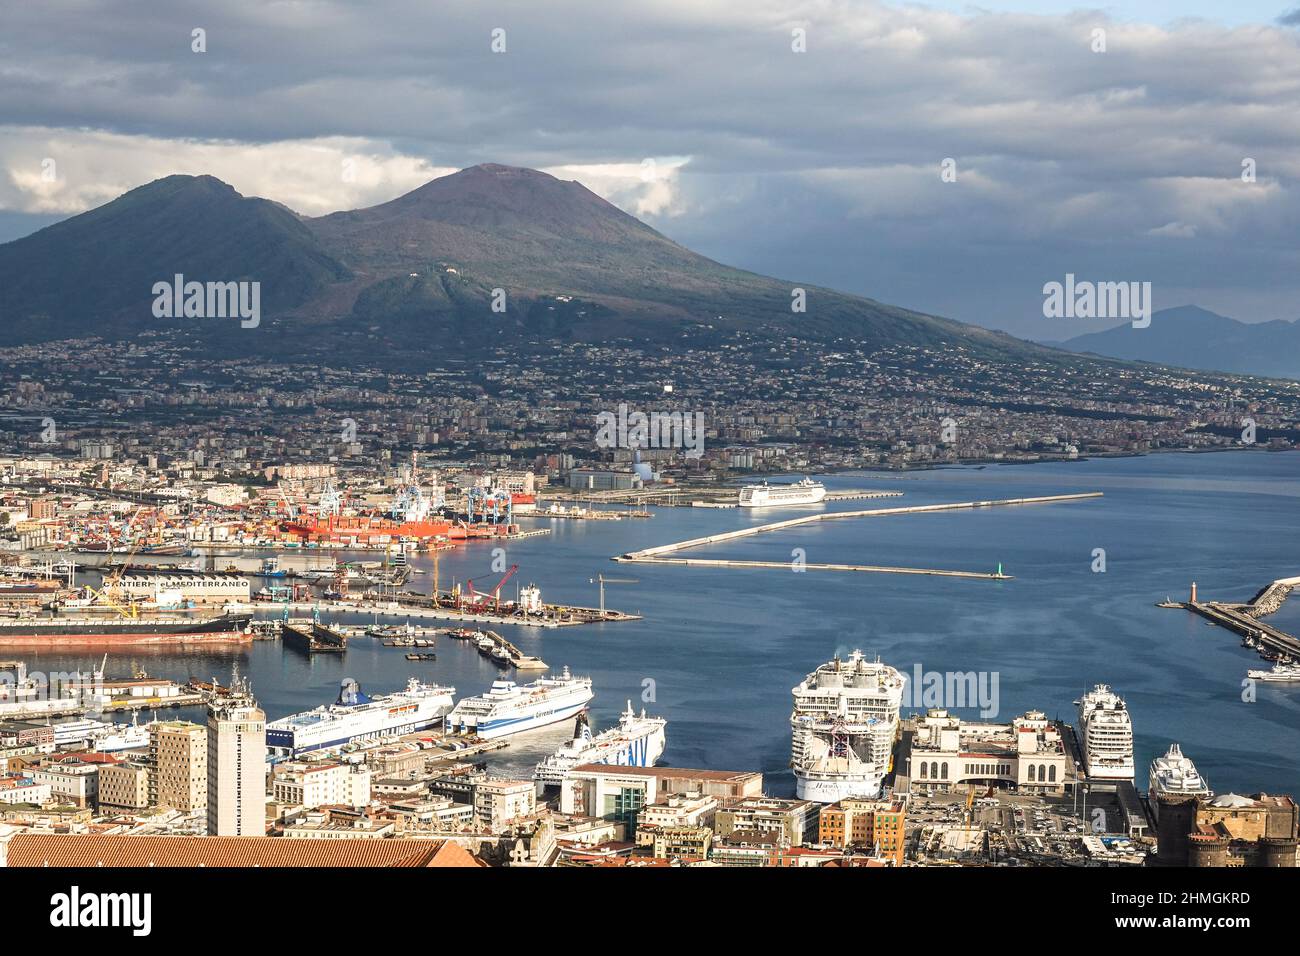 Napoli, Italy - October 15 2021: Aerial view of the Napoli harbor that holds many large ships such as the Harmony of the Seas cruise ship and GNV ferr Stock Photo